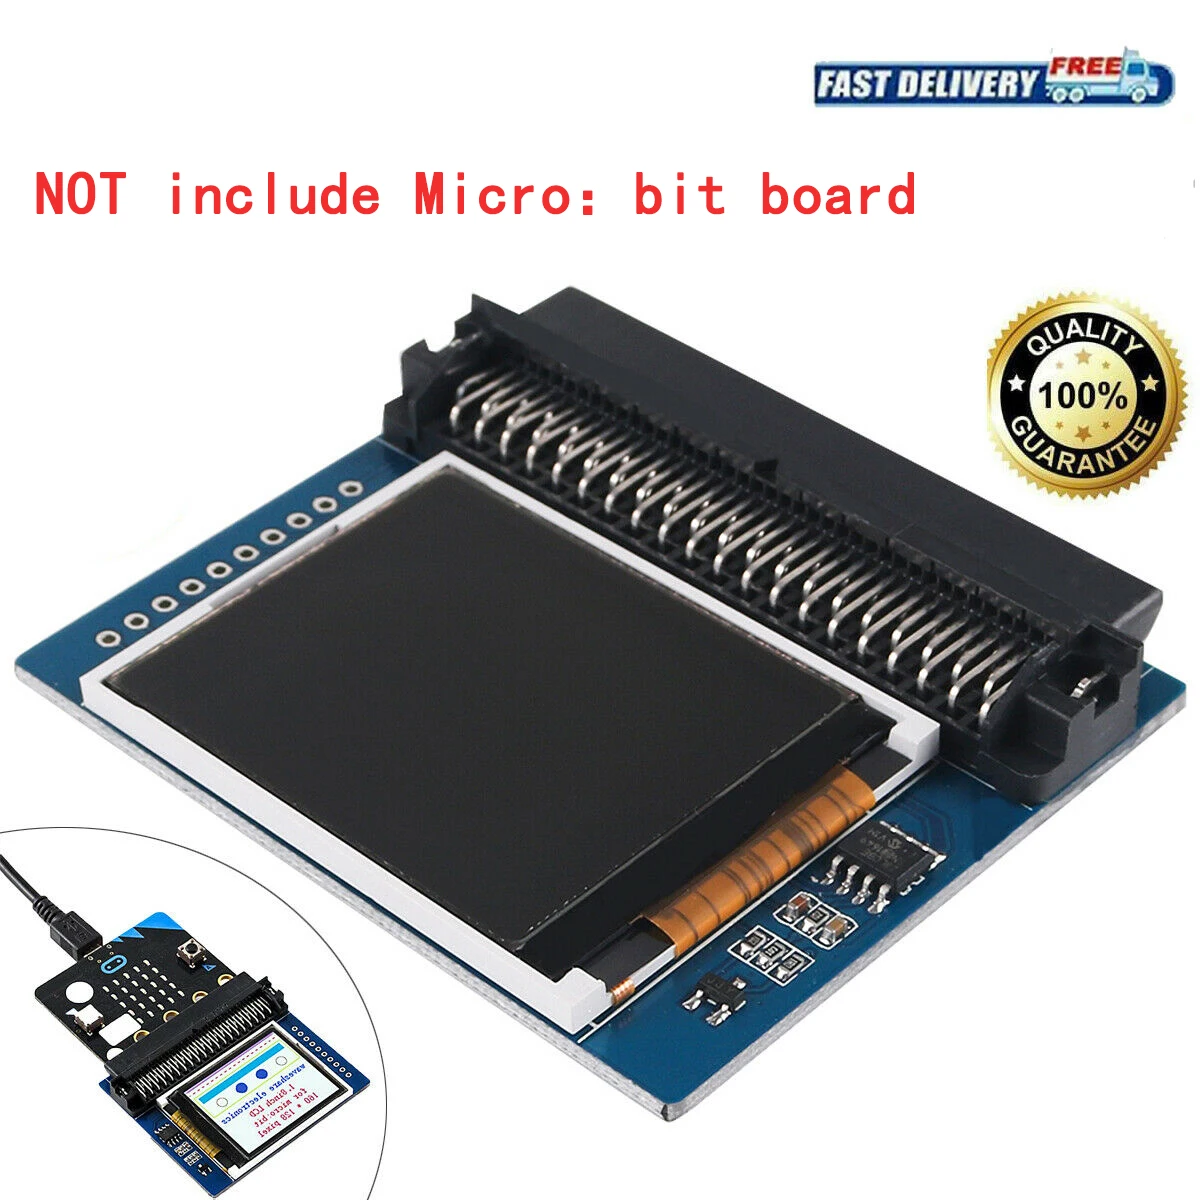 1.8 inch 160x128 RGB Colorful LCD Display Screen Module Breakout Board DIY for BBC Microbit Micro:bit V2 Accessories